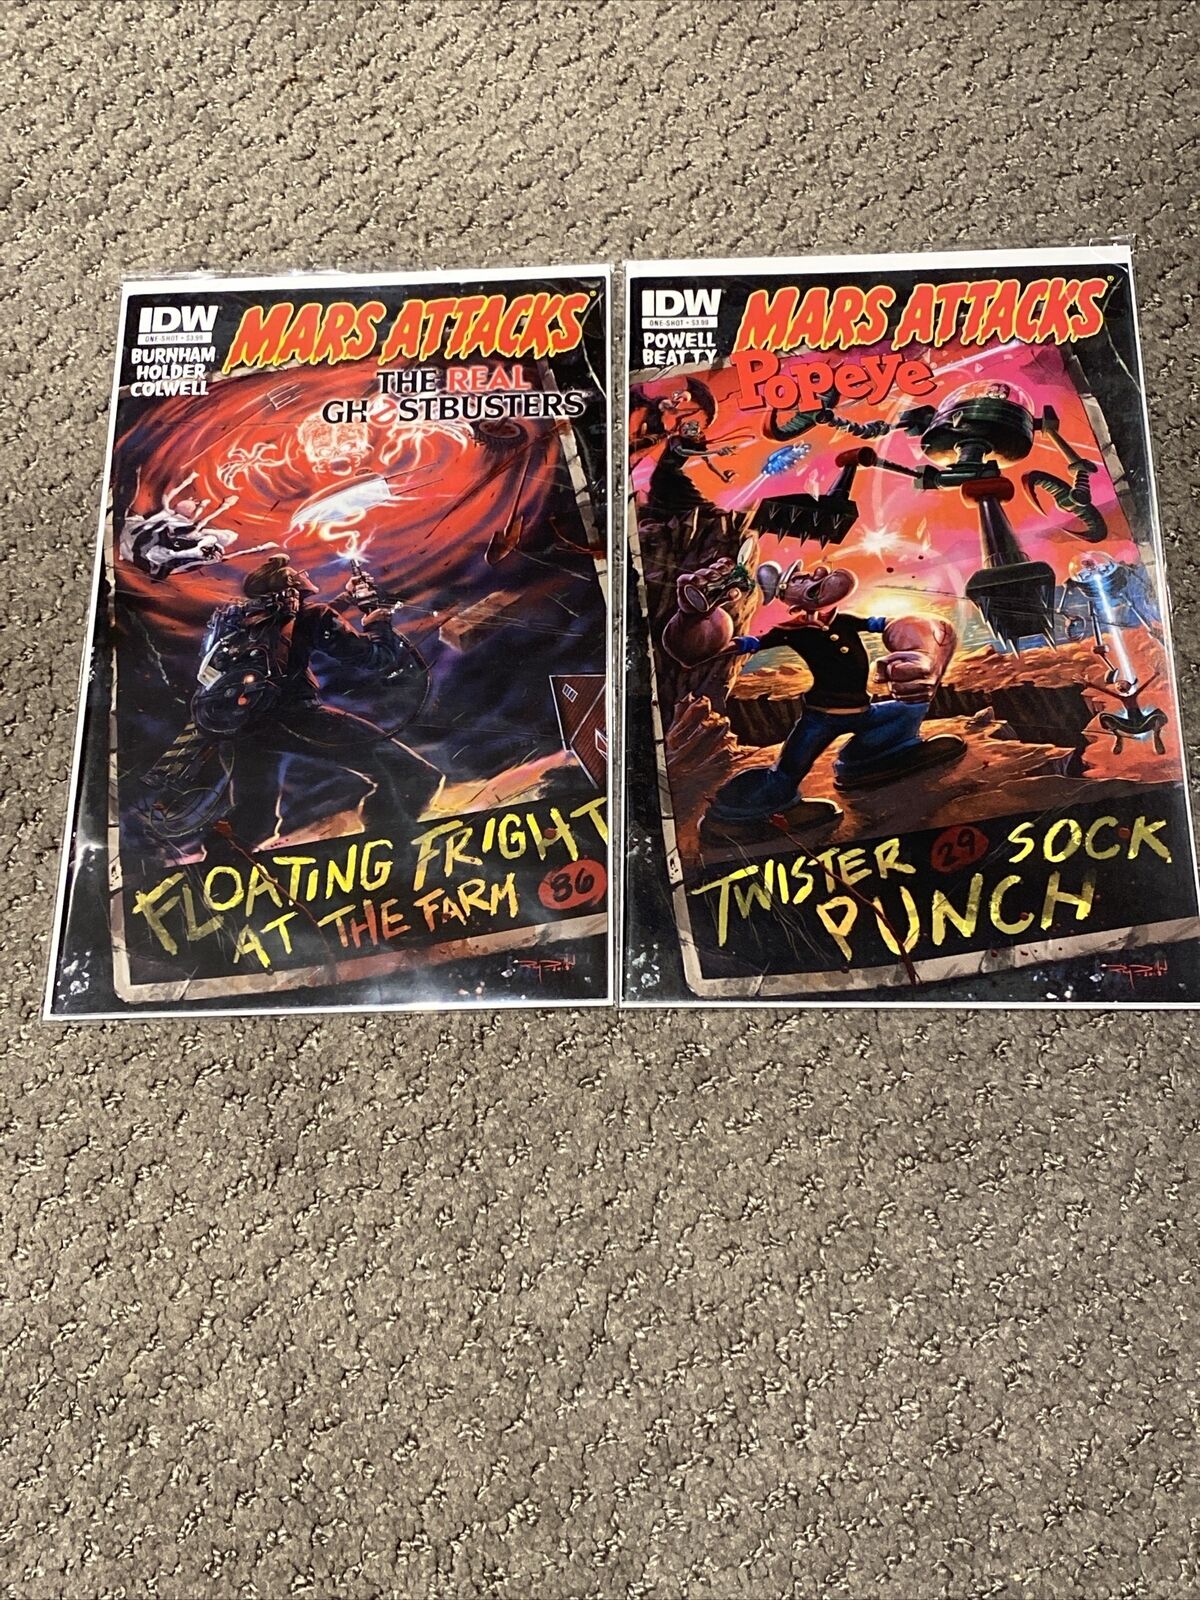 Mars Attacks One-Shot Set - The Real Ghostbusters  & Popeye - IDW Lot